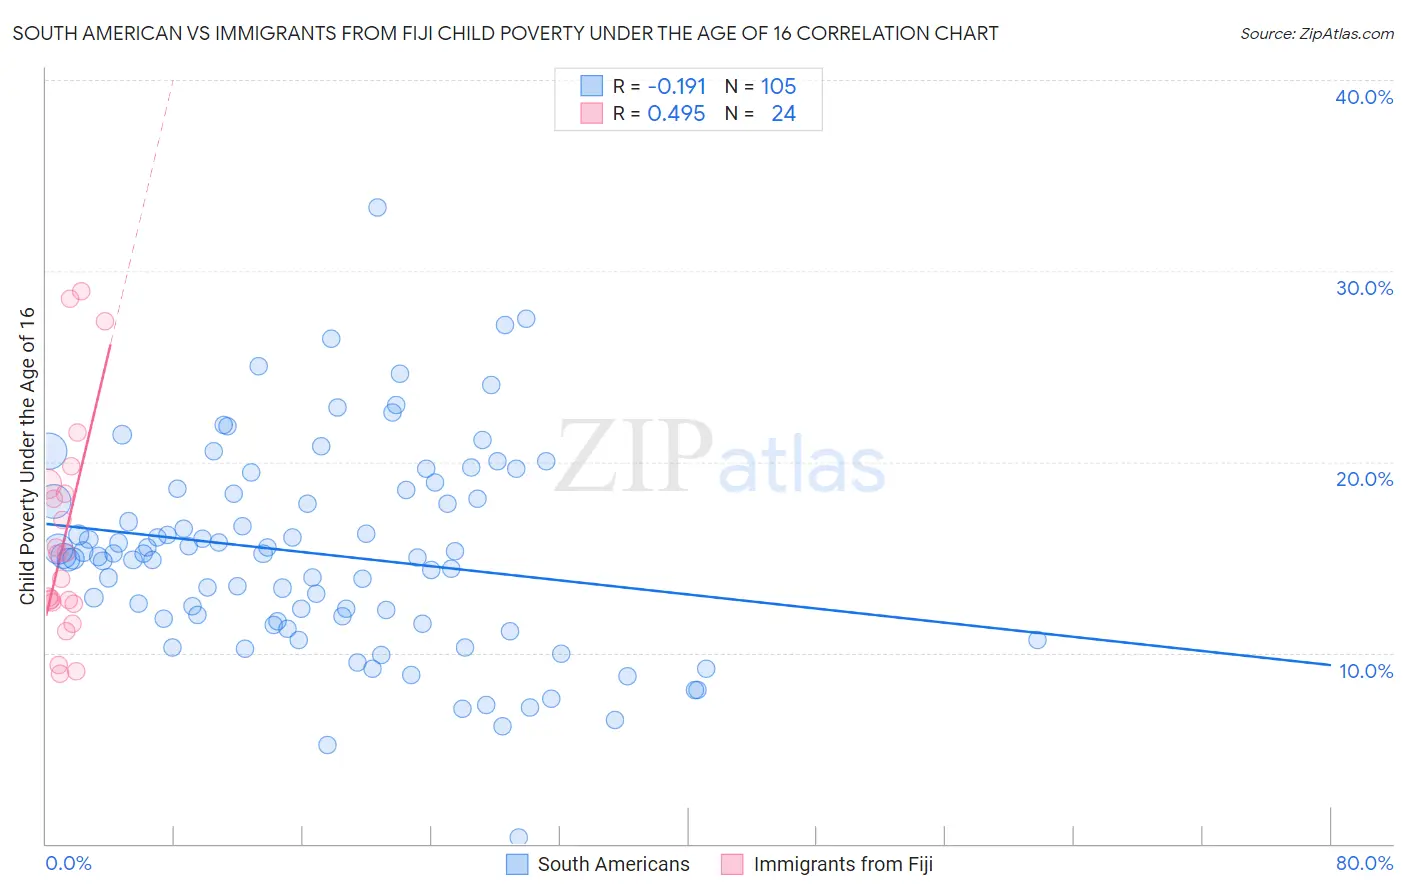 South American vs Immigrants from Fiji Child Poverty Under the Age of 16